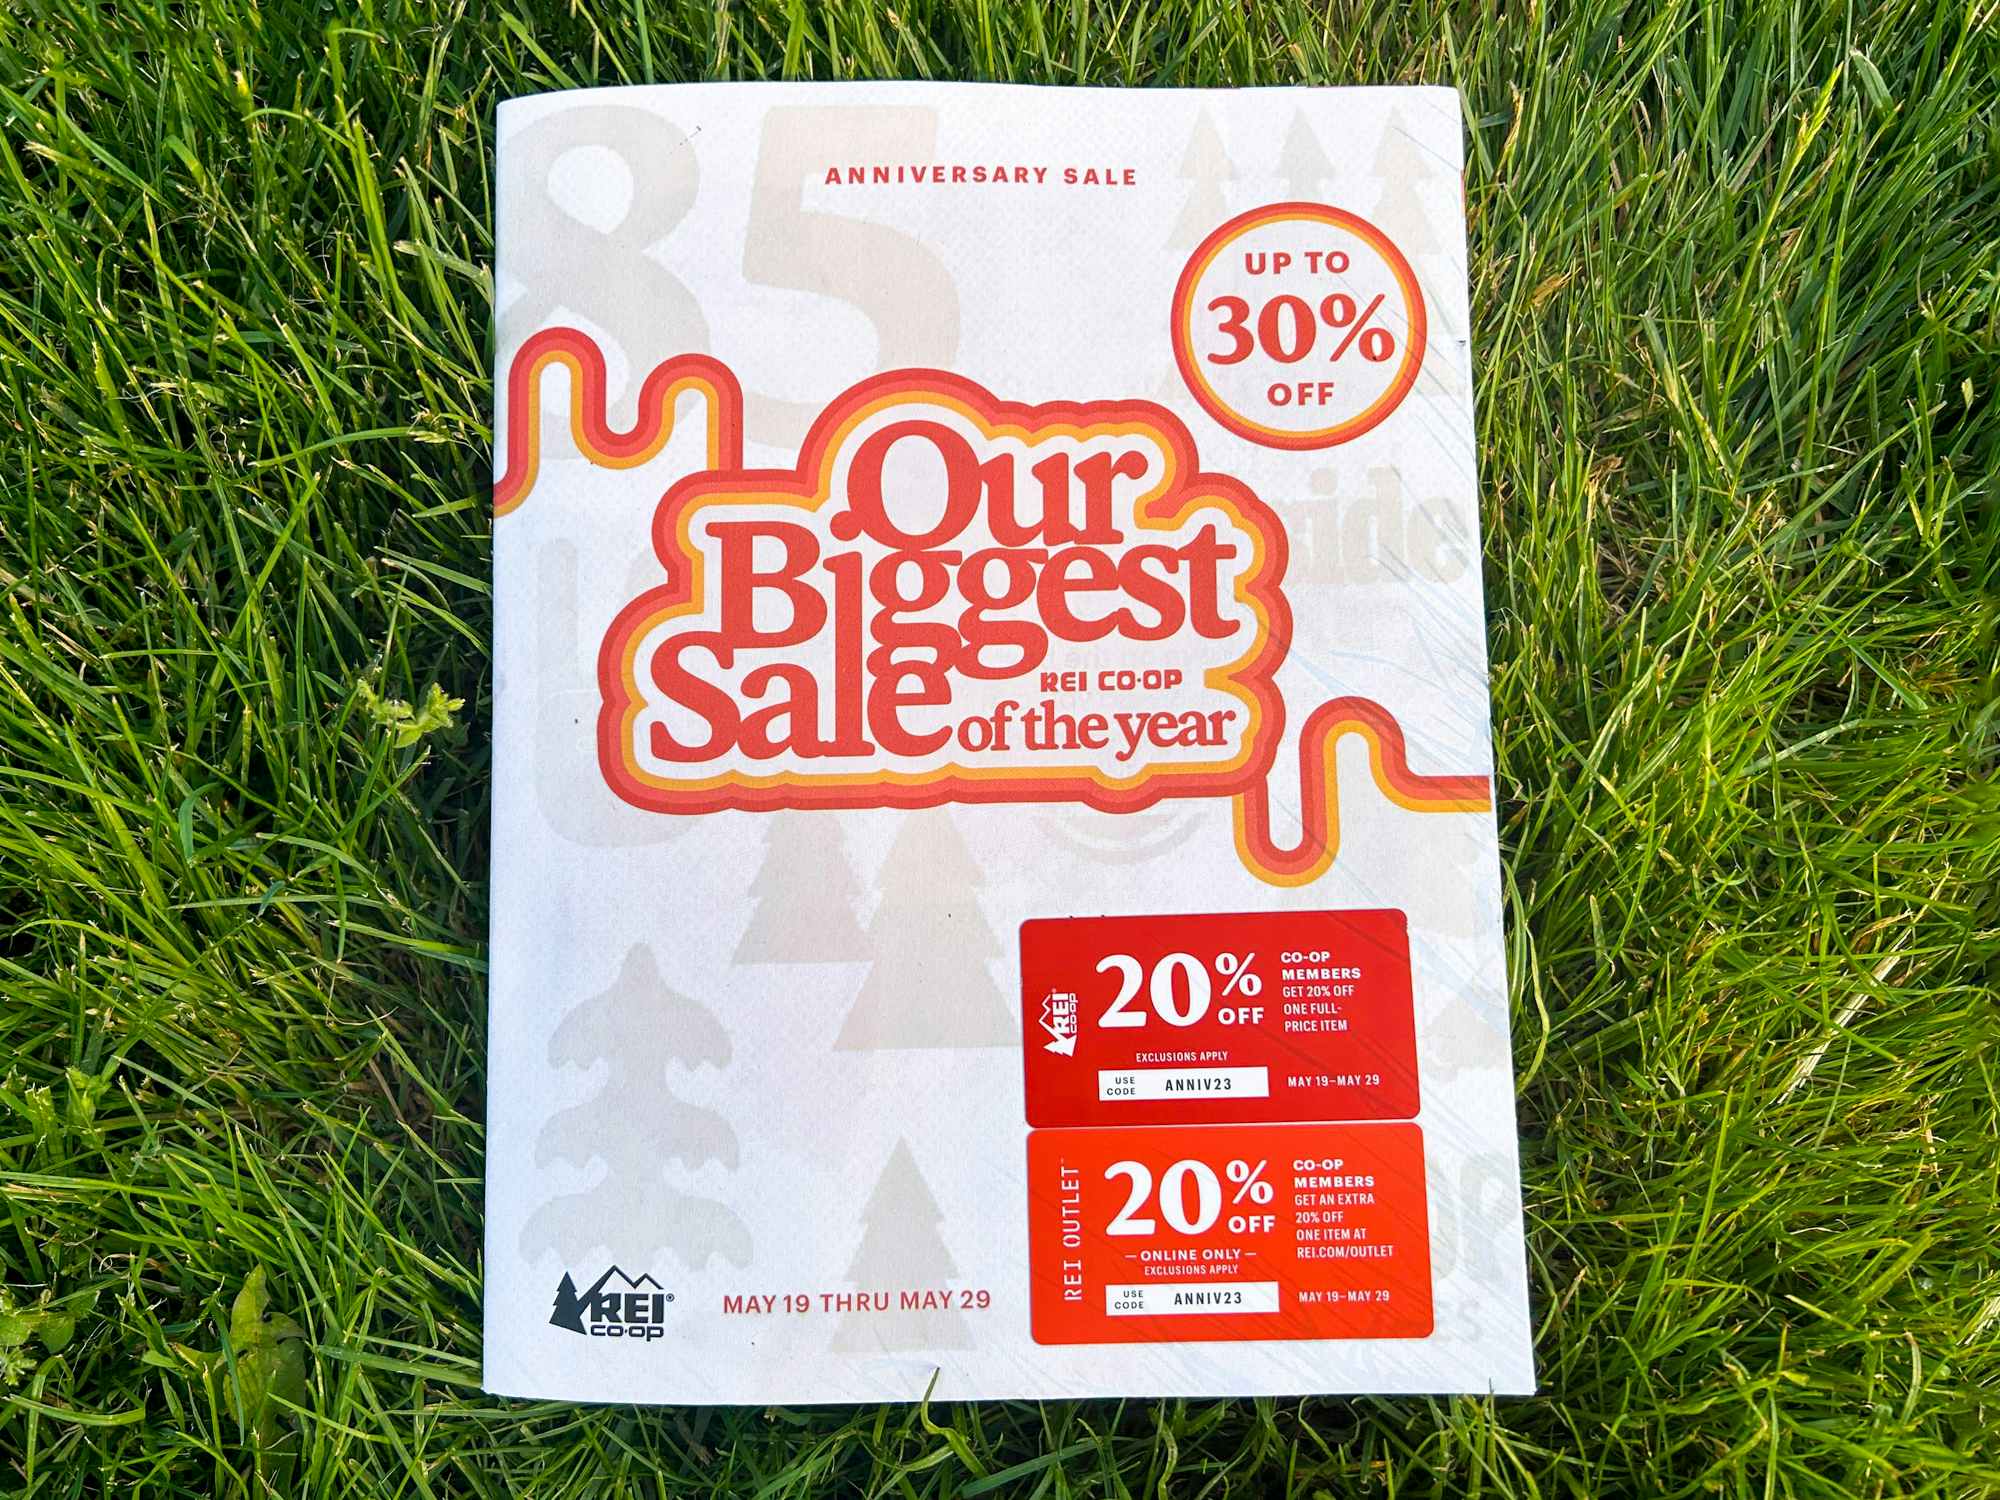 https://prod-cdn-thekrazycouponlady.imgix.net/wp-content/uploads/2023/05/rei-coop-store-anniversary-sale-biggest-sale-of-the-year-advertisement-mailer-kcl-22-1684935245-1684935246.jpg?auto=format&fit=fill&q=25